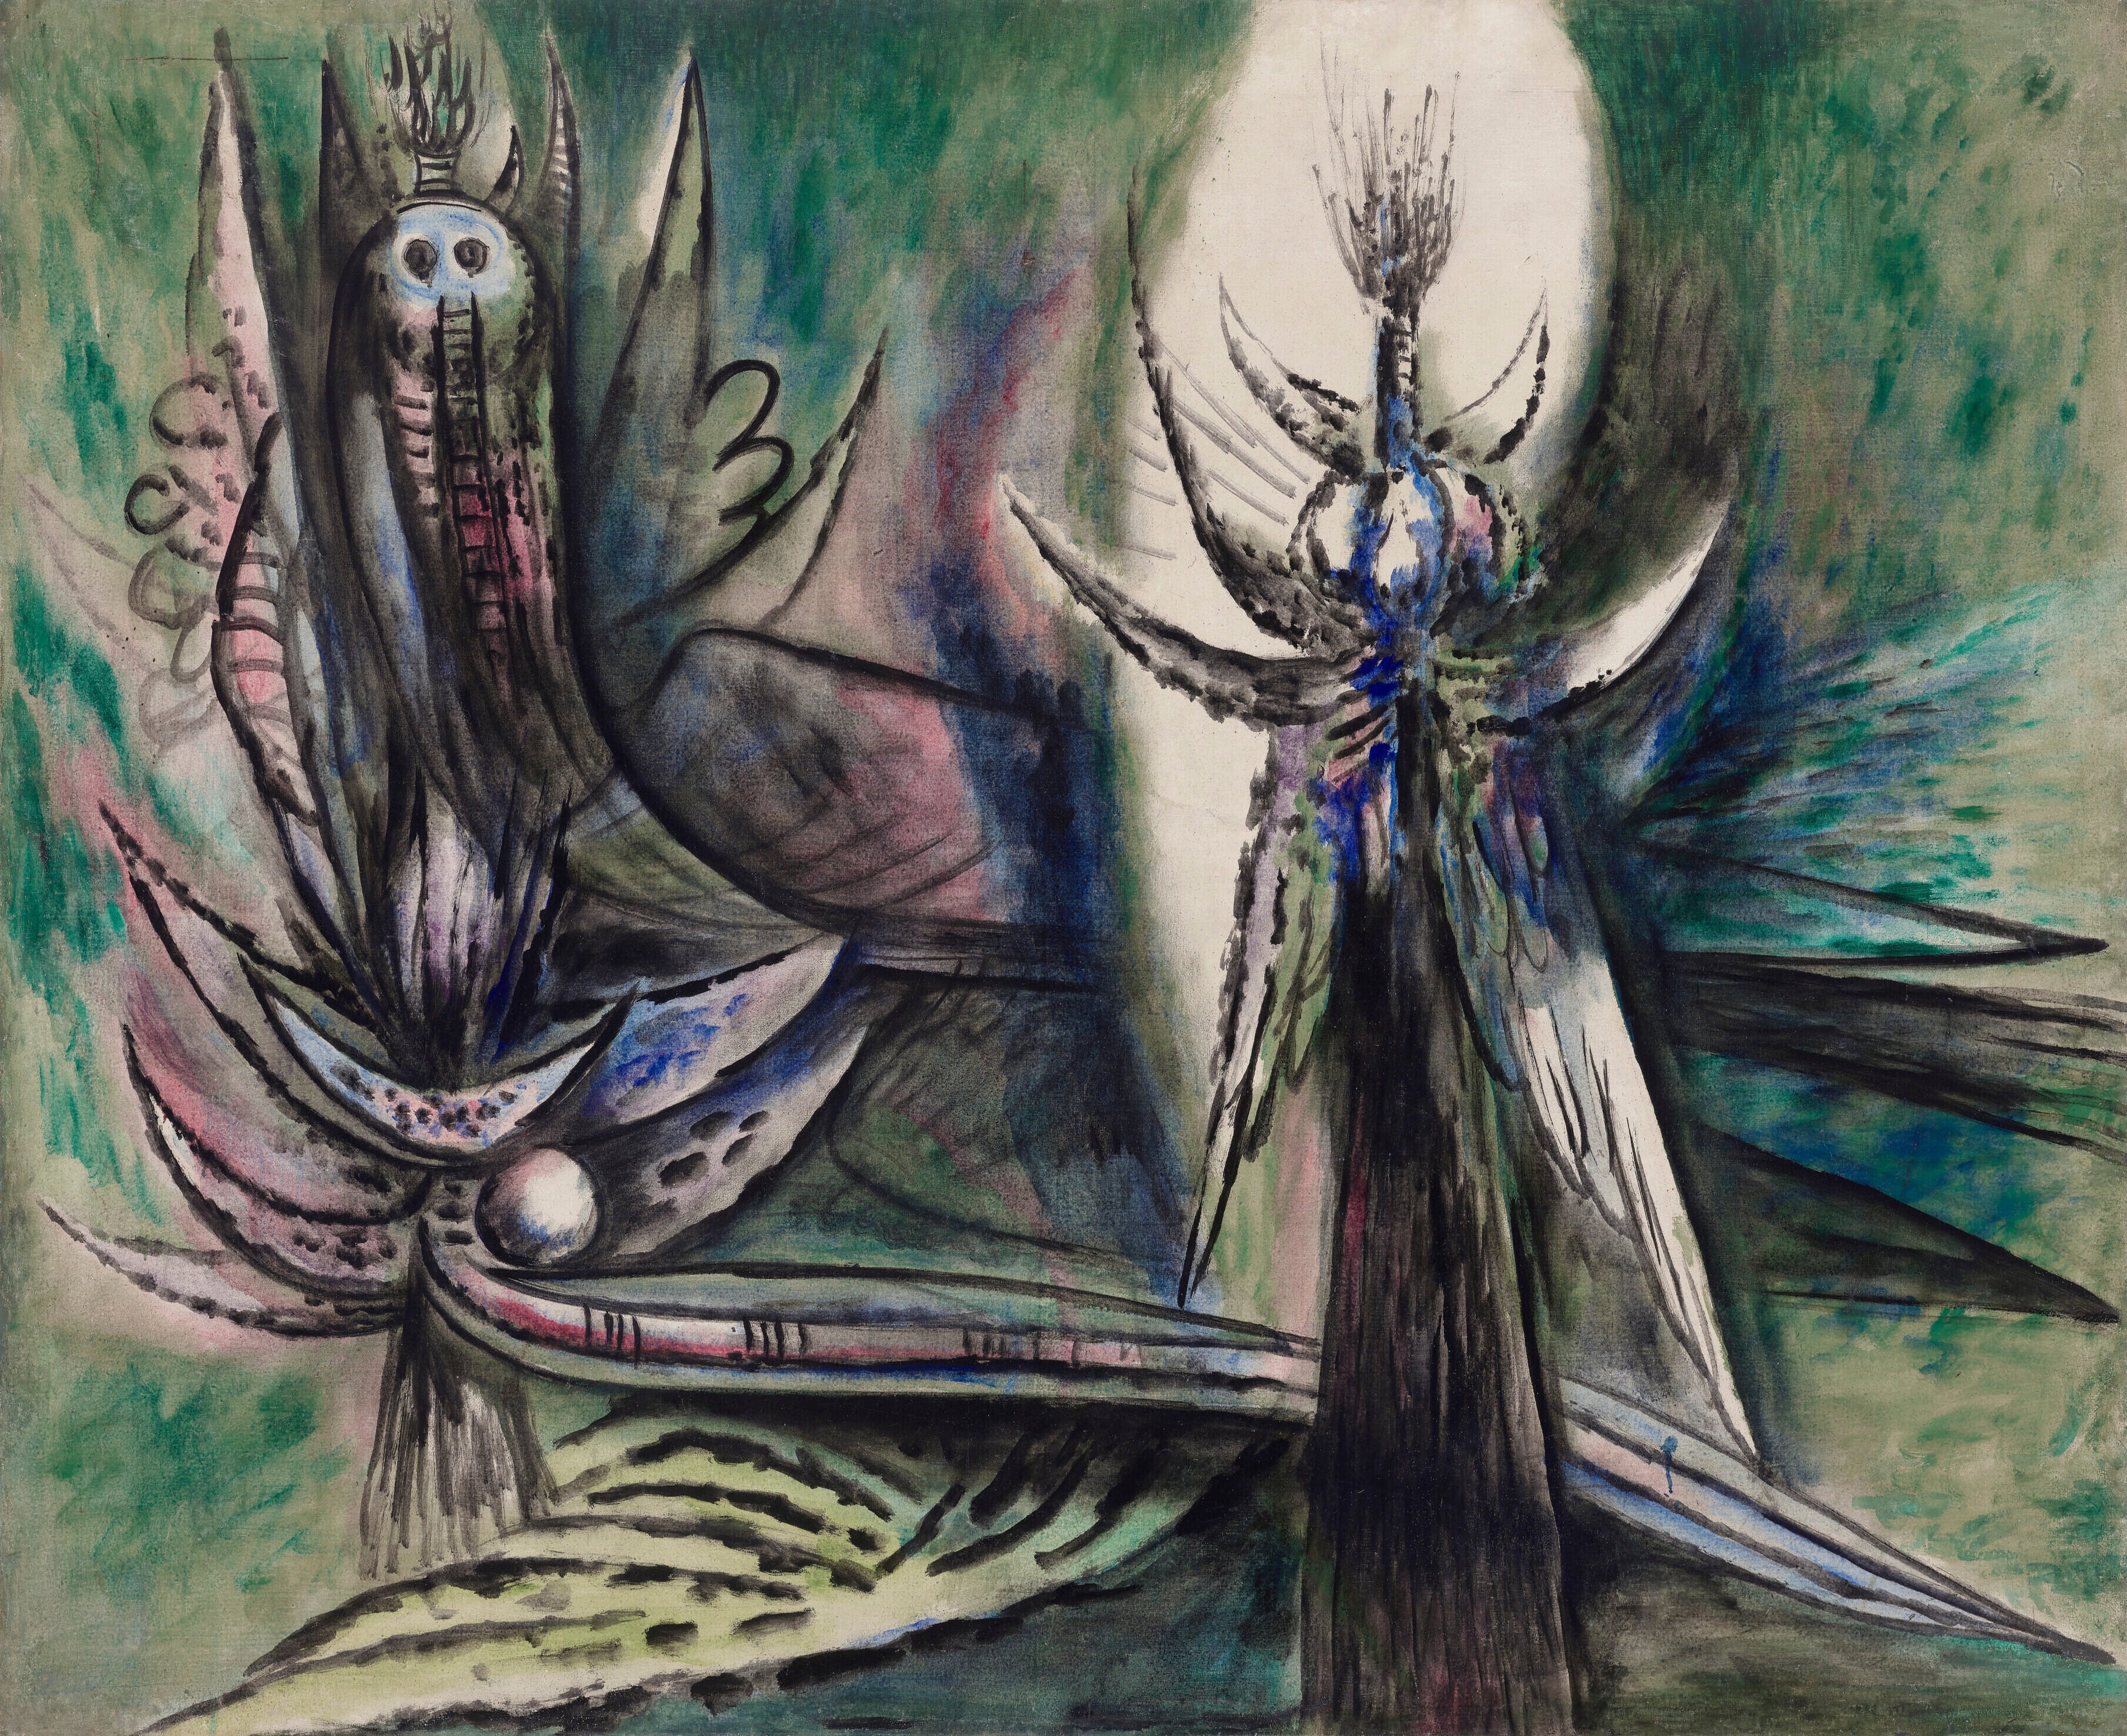 Detail from Damballah, 1947, oil on canvas, by Wifredo Lam, from the collection of Daniel Boulakia. Cuban-born Lam’s works are well known outside Asia, but a newly opened solo exhibition in Hong Kong is the first in the city. Photo: Asia Society, Hong Kong